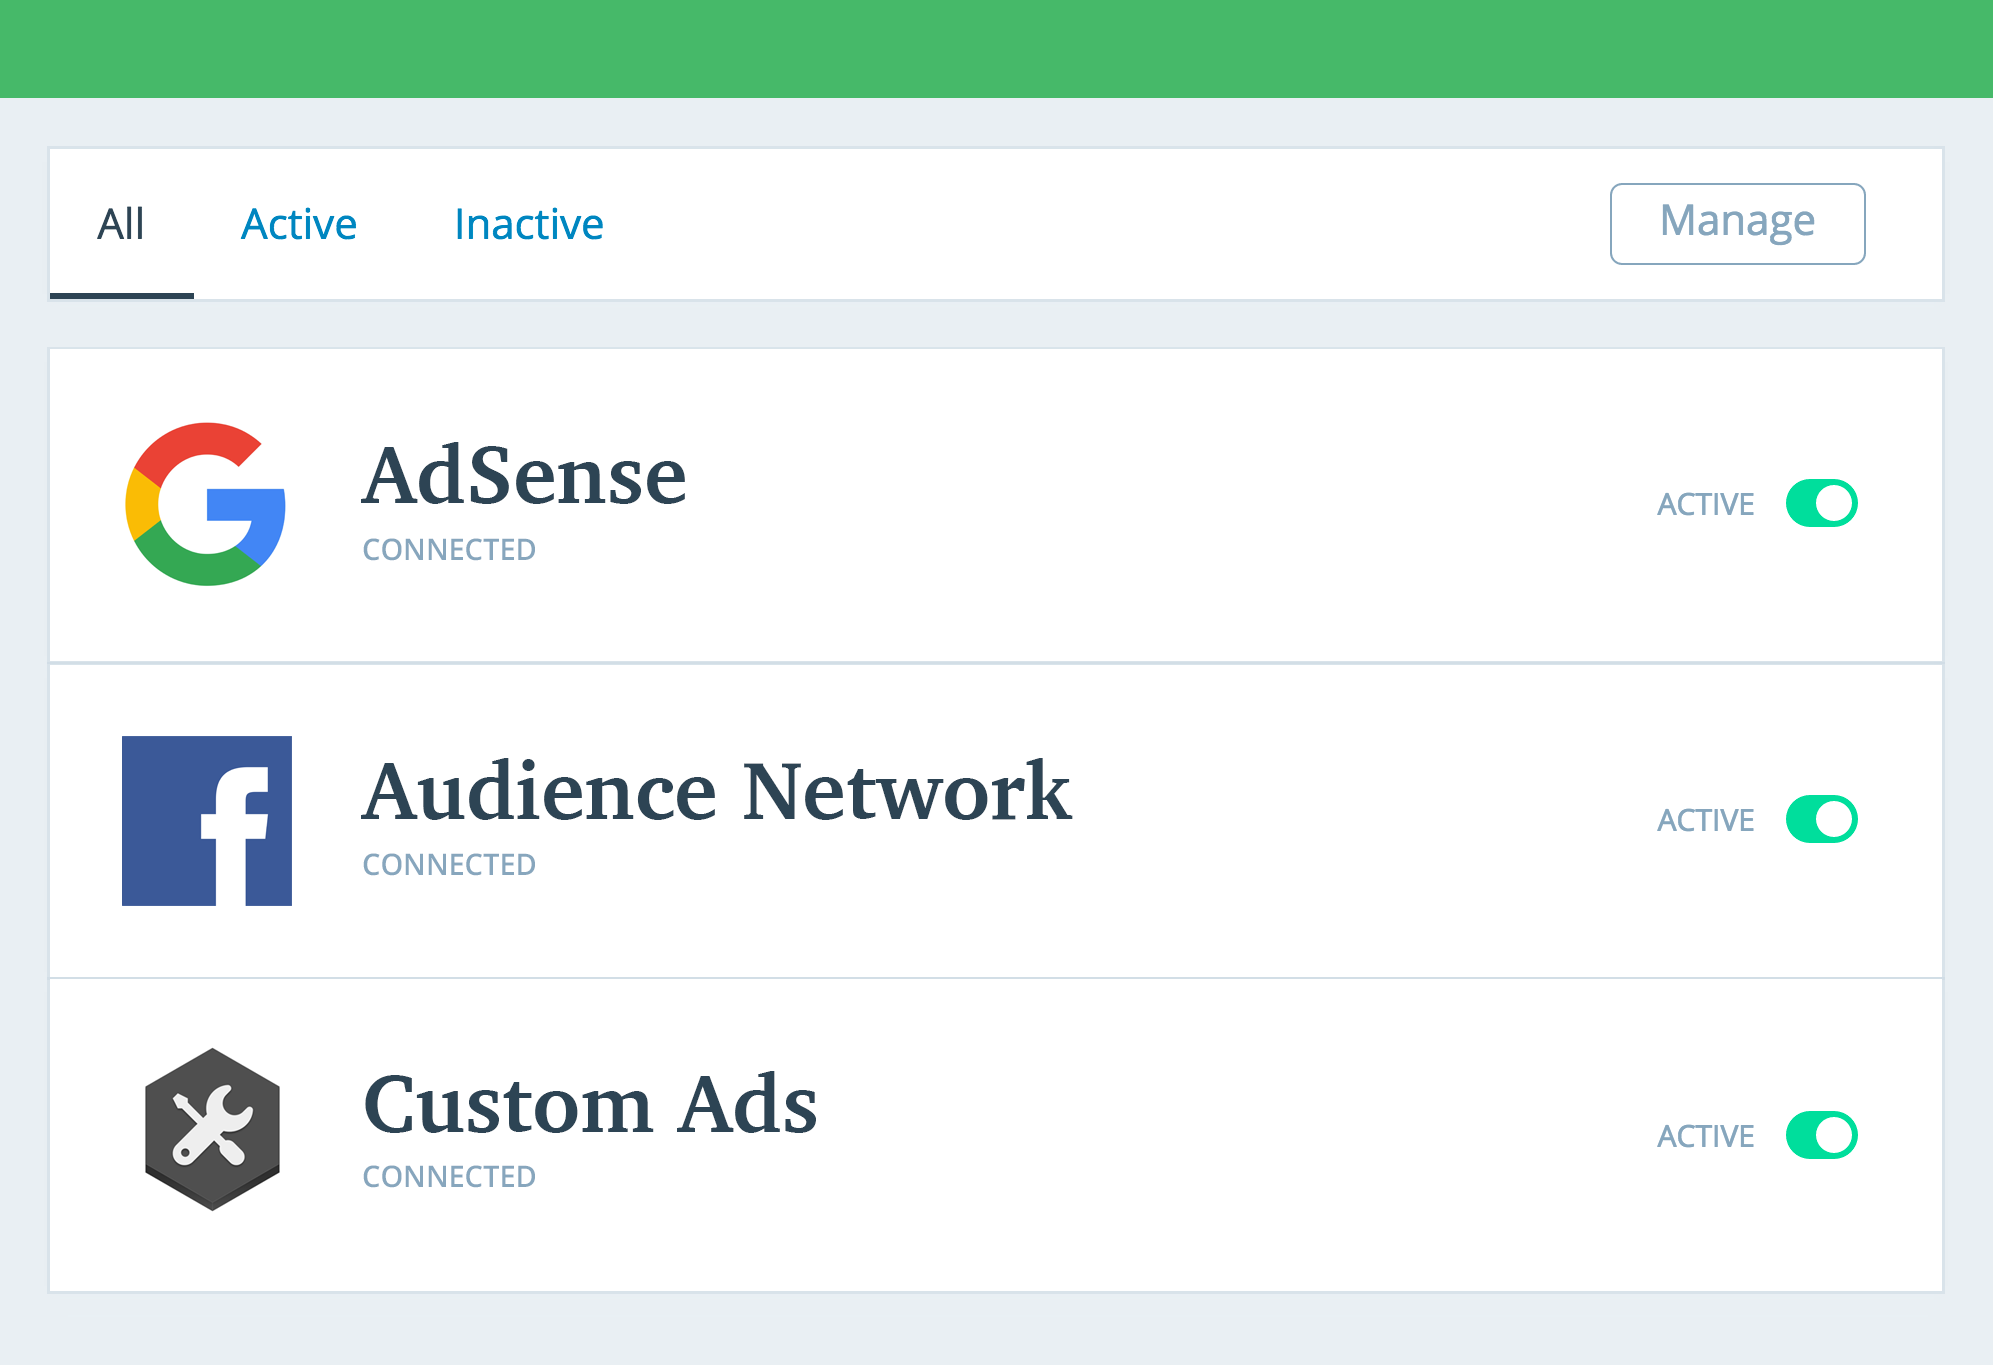 Connect your Google AdSense account Au nce Network account or configure custom ads to serve ad units in your Instant Articles and